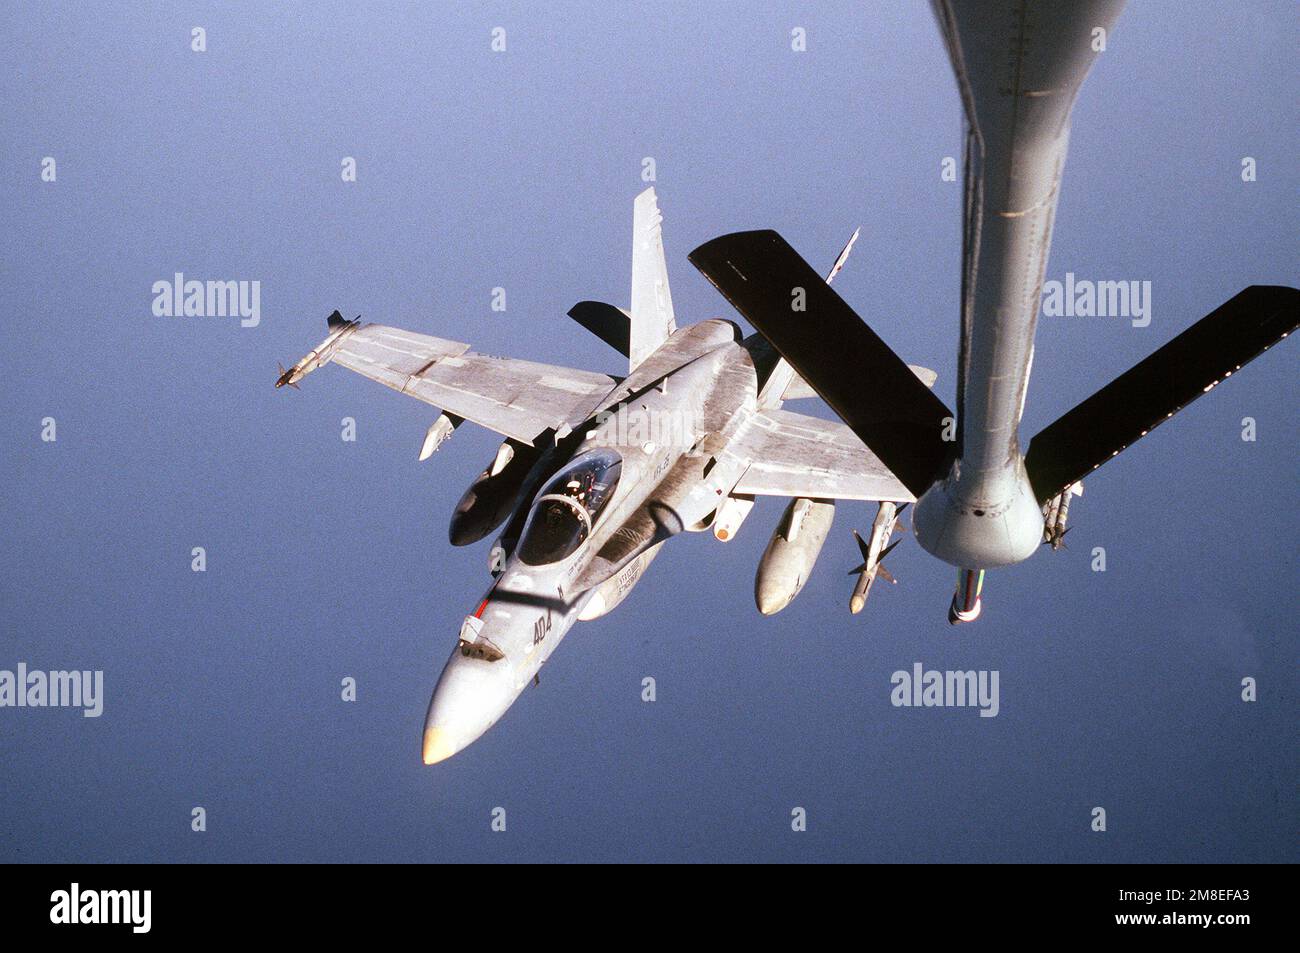 A Fighter Squadron 25 (VFA-25) F/A-18C Hornet aircraft flies beneath the refueling boom of an Air Force KC-135 Stratotanker aircraft off the eastern coast of Saudi Arabia during Operation Desert Shield. The aircraft is carrying an AIM-9 Sidewinder missile on each wing tip, an AIM-7 Sparrow missile on its outboard port side wing pylon and a borrowed external fuel tank under its fuselage. VFA-25 is based aboard the aircraft carrier USS INDEPENDENCE (CV-62). Subject Operation/Series: DESERT SHIELD Country: Unknown Stock Photo